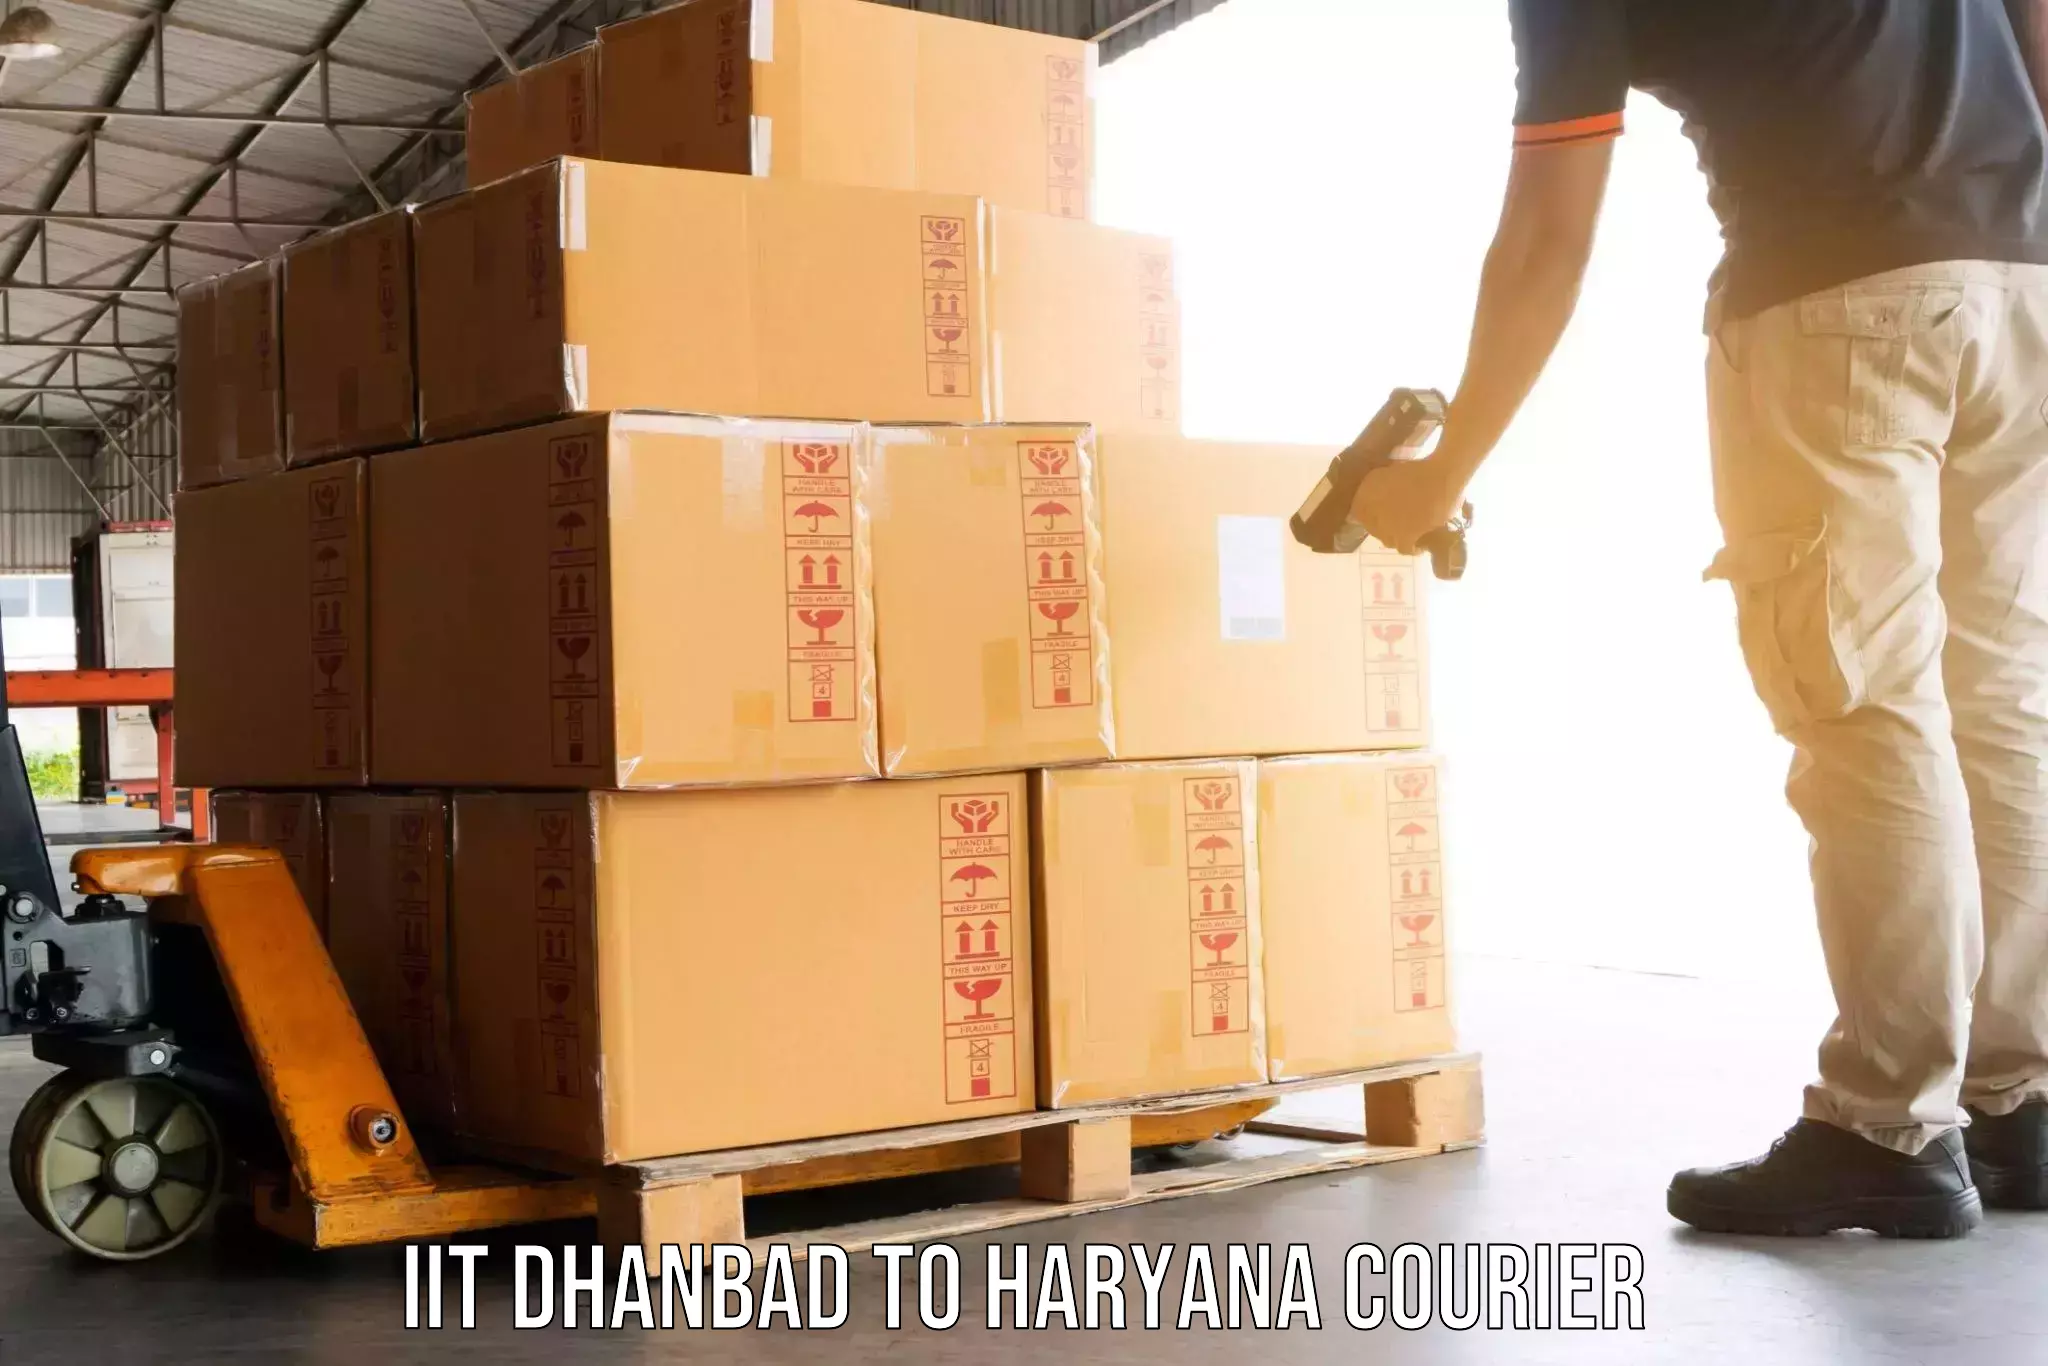 Quality relocation services in IIT Dhanbad to Fatehabad